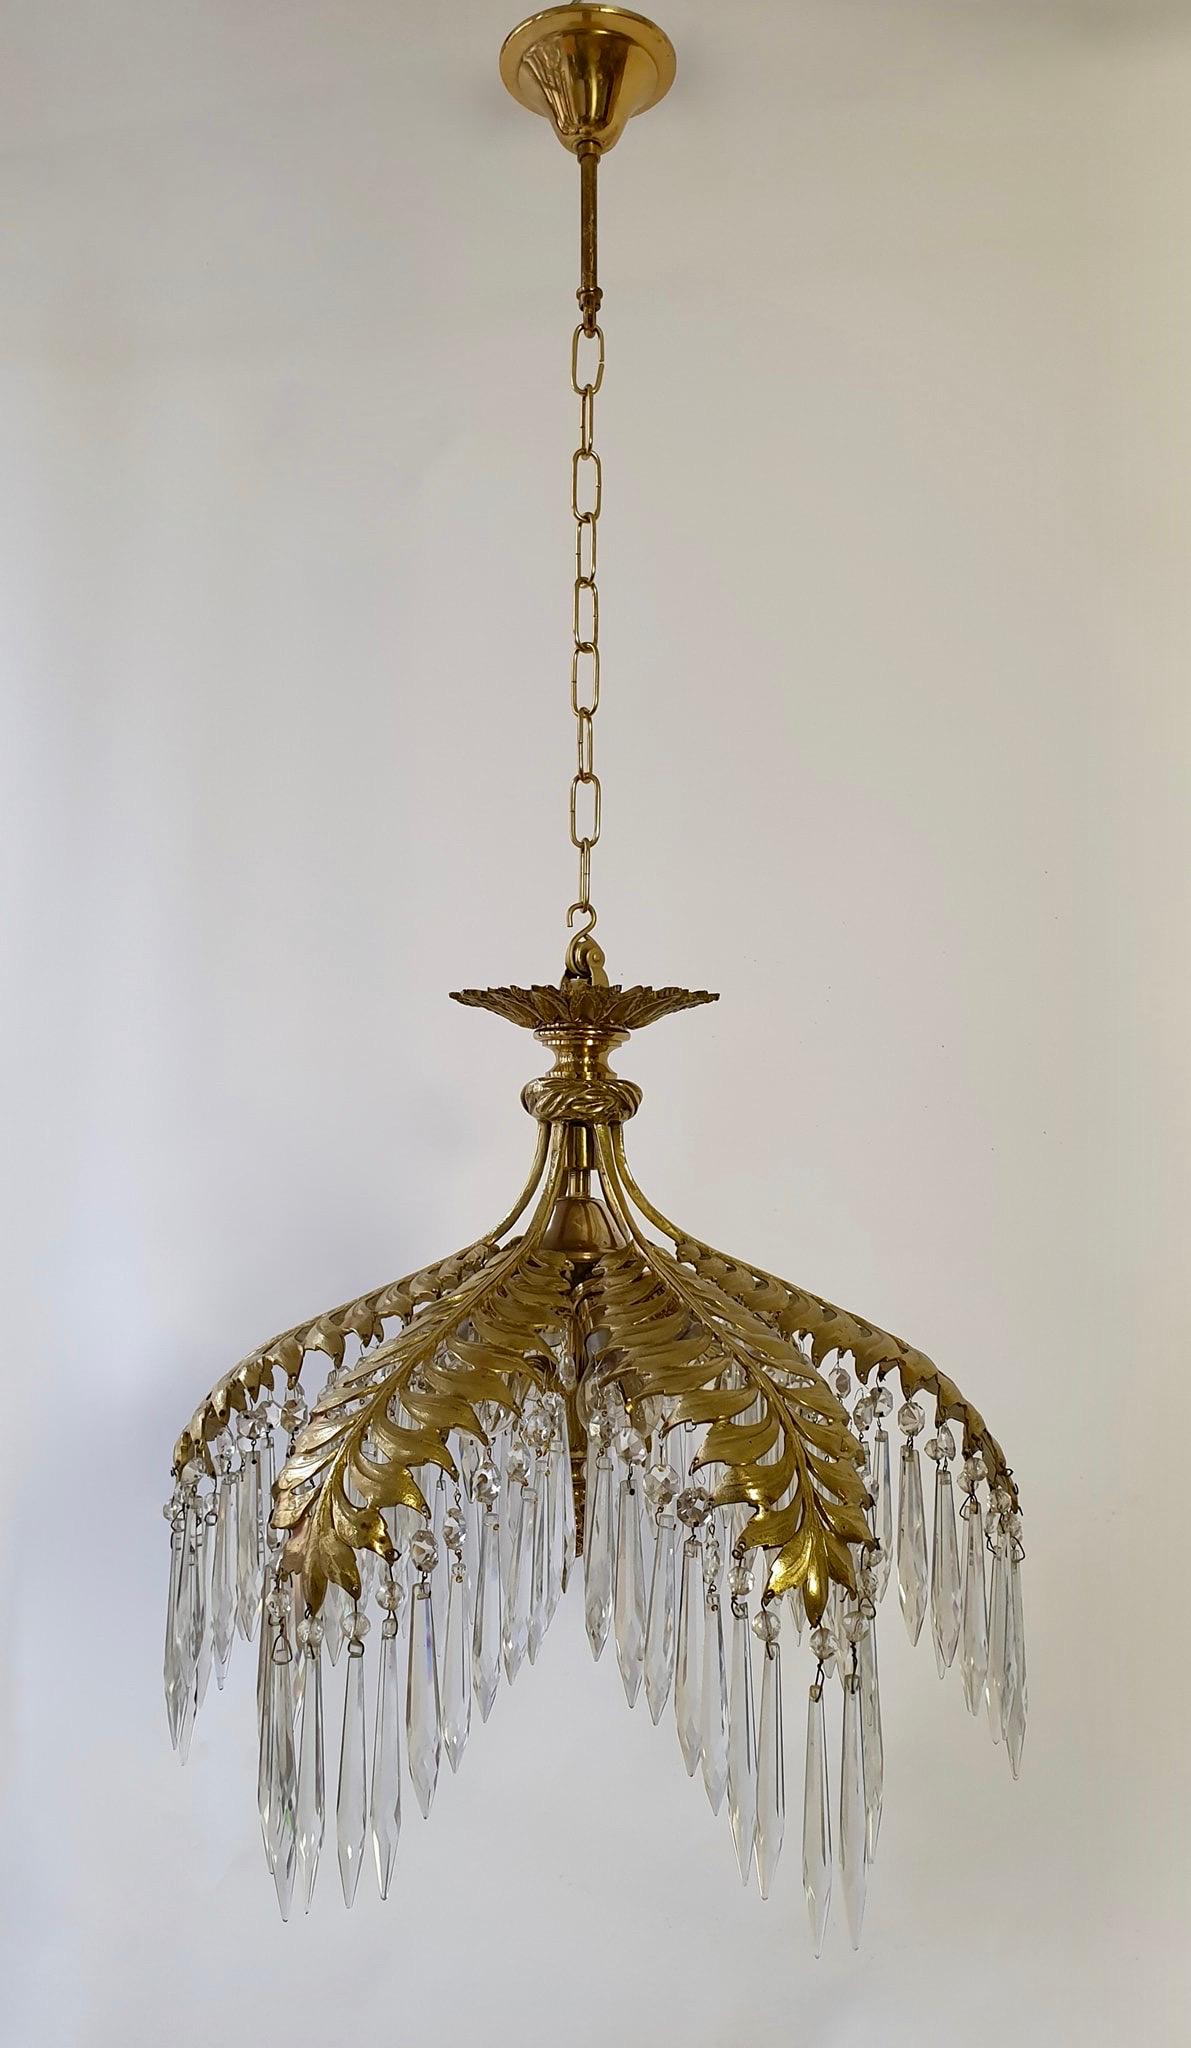 Superb gilt bronze chandelier with issuing elegant leaves from which hang cut-crystal pendants and hiding six-light.
Glamorous Maison Jansen bronze palm frond chandelier with crystal cones, circa 1920s. Retains warm original patina. Maison Jansen